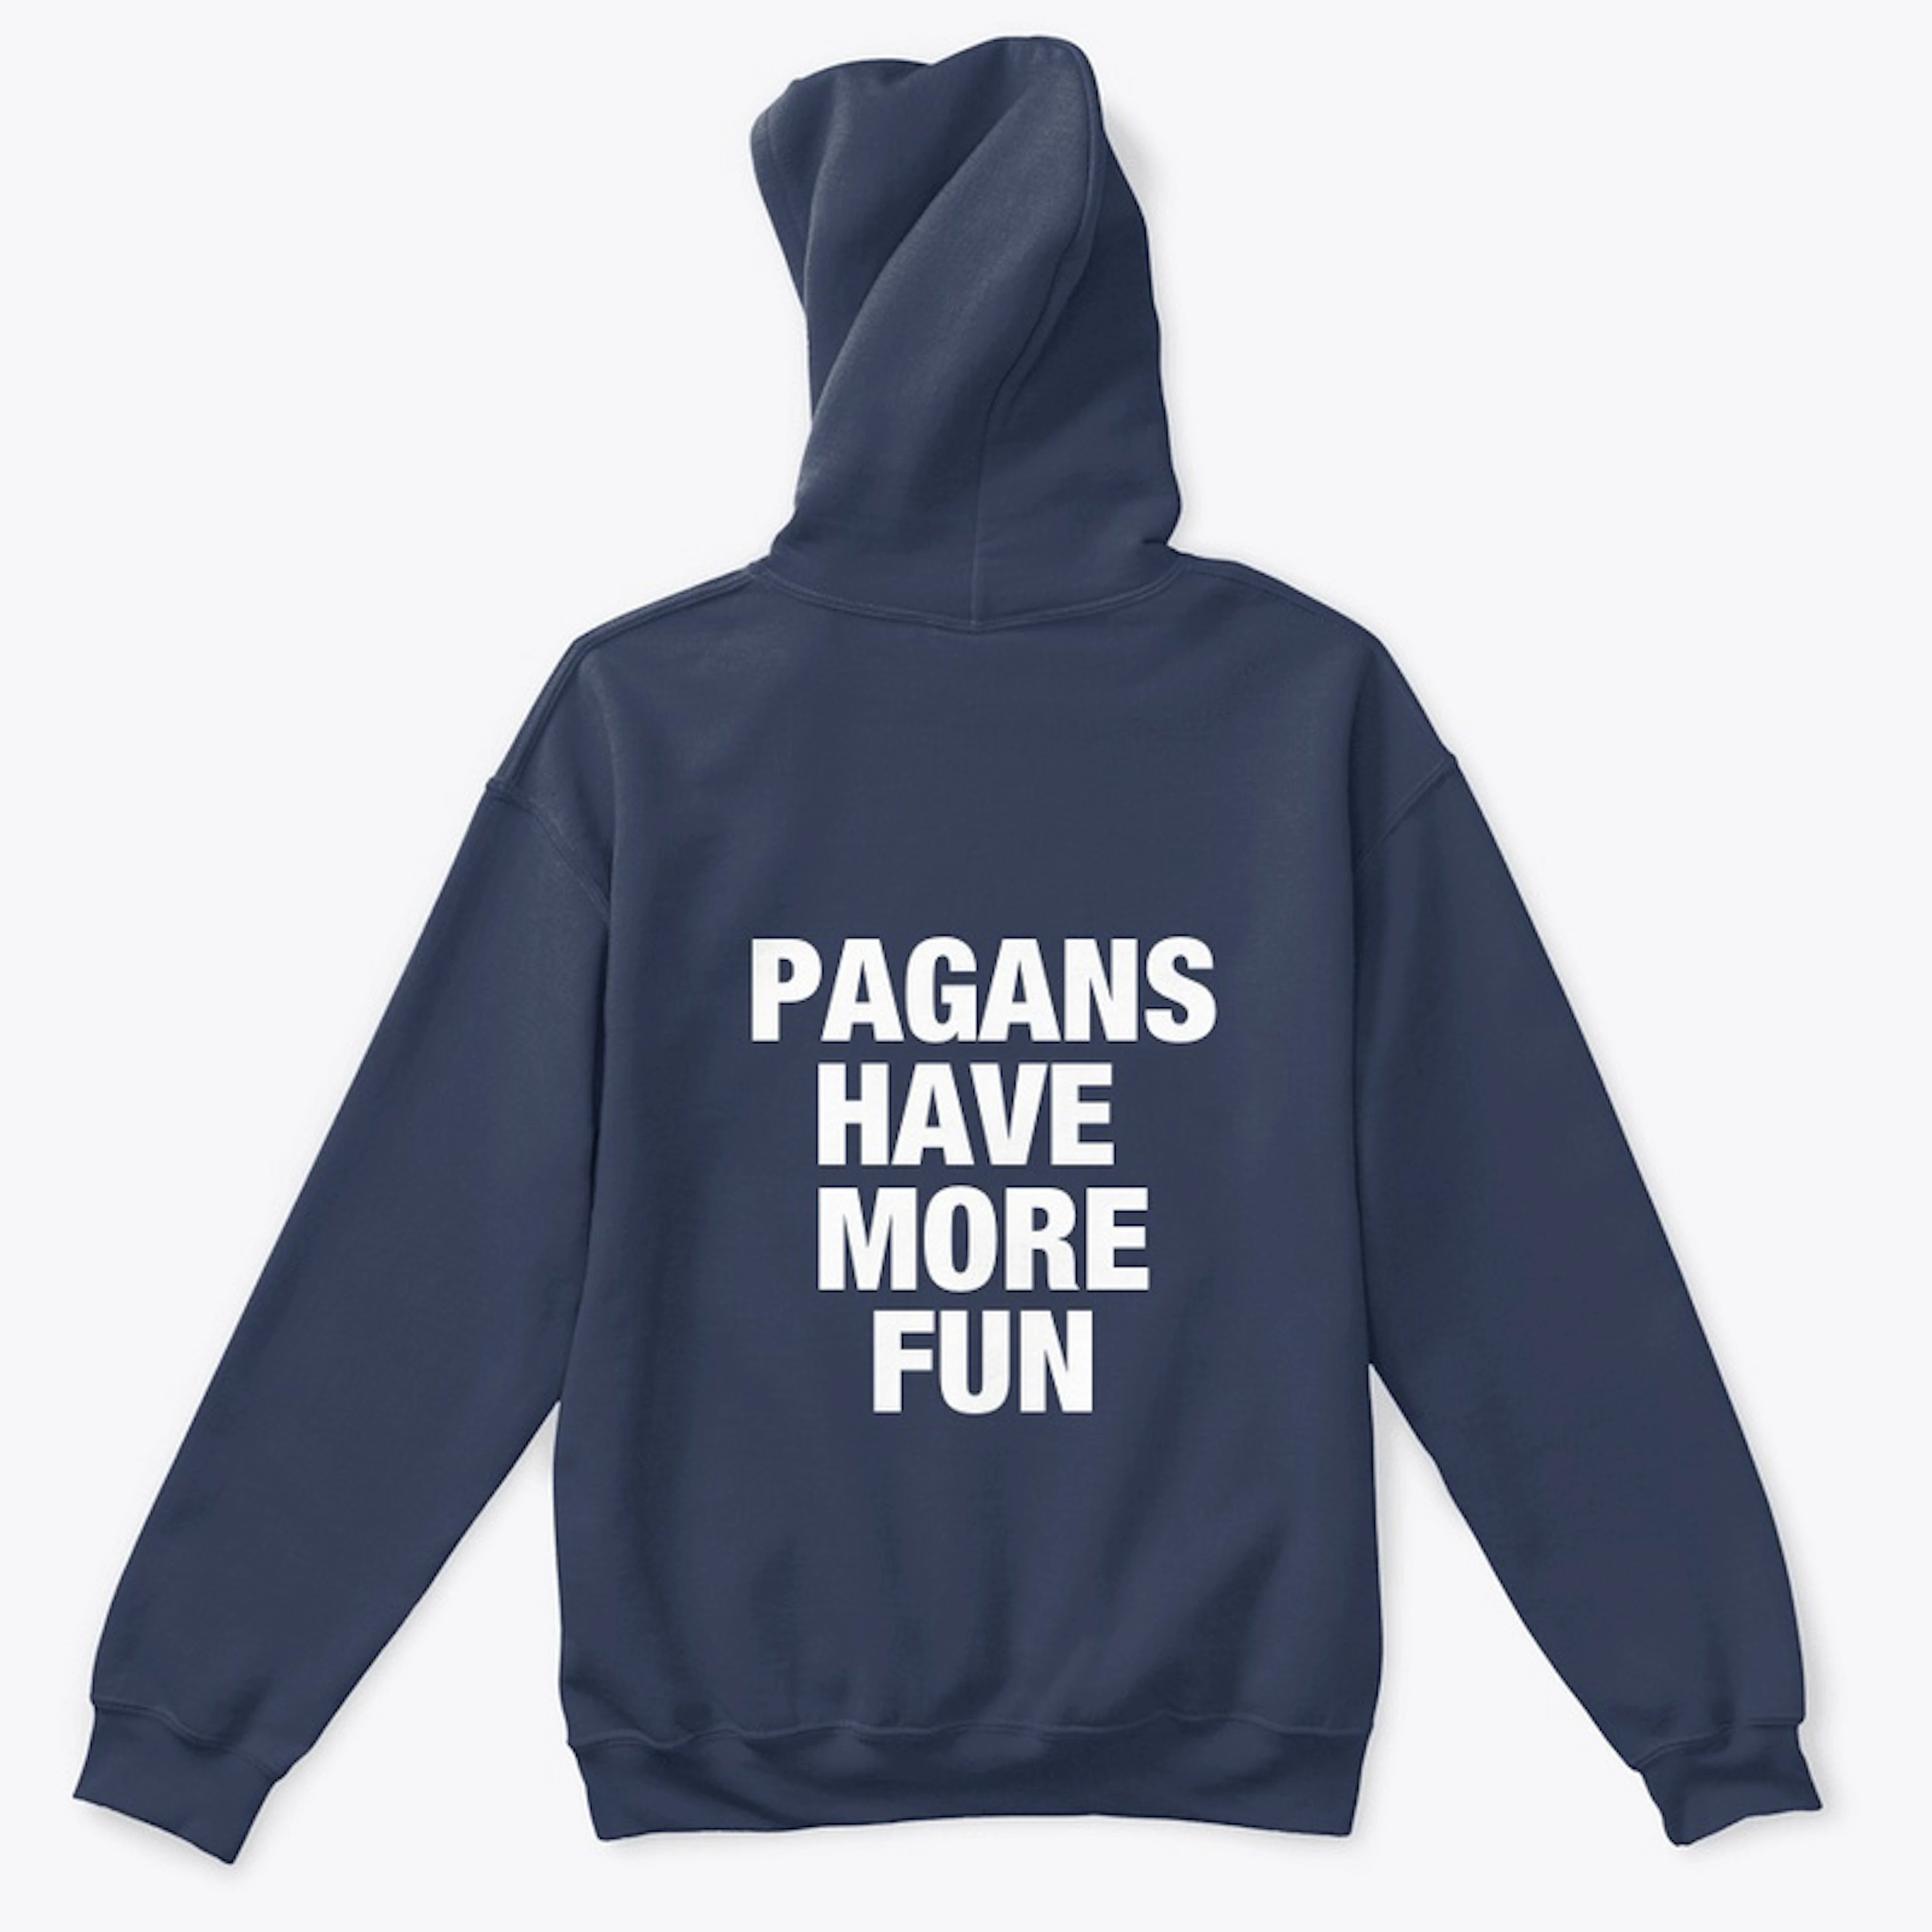 Pagans have more fun line